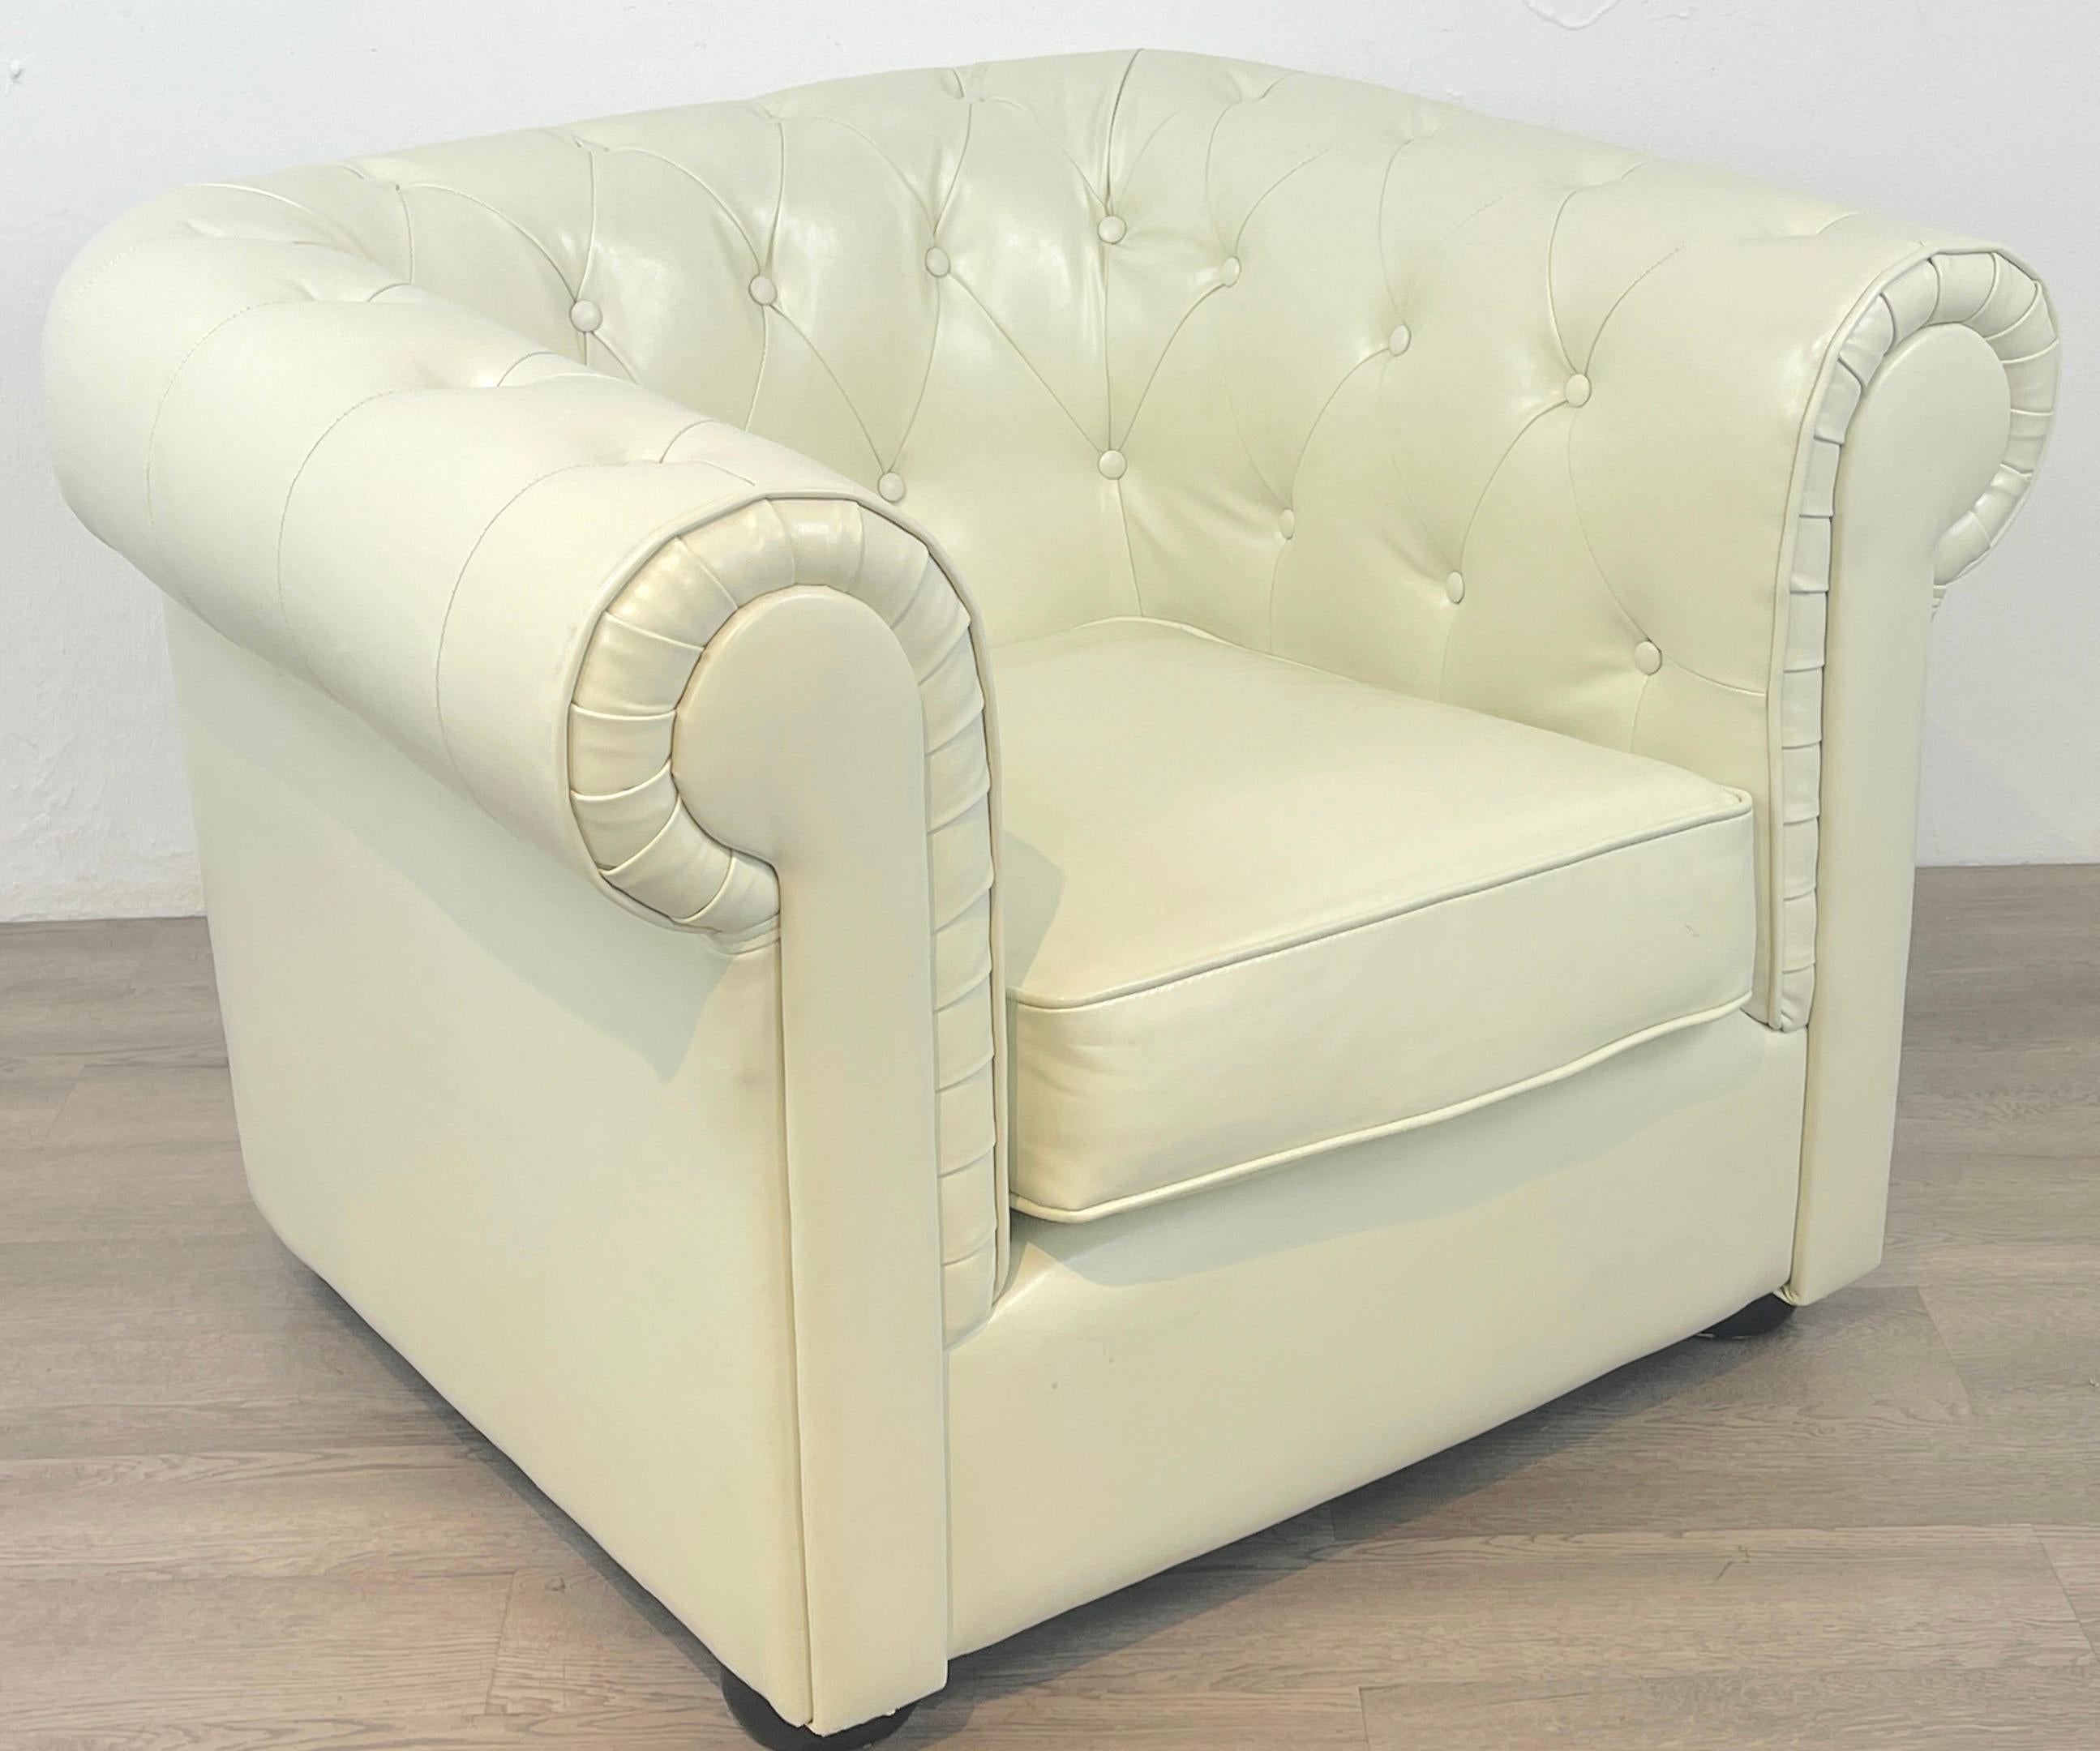 20th Century Pair of White Leather Chesterfield Club Chairs For Sale